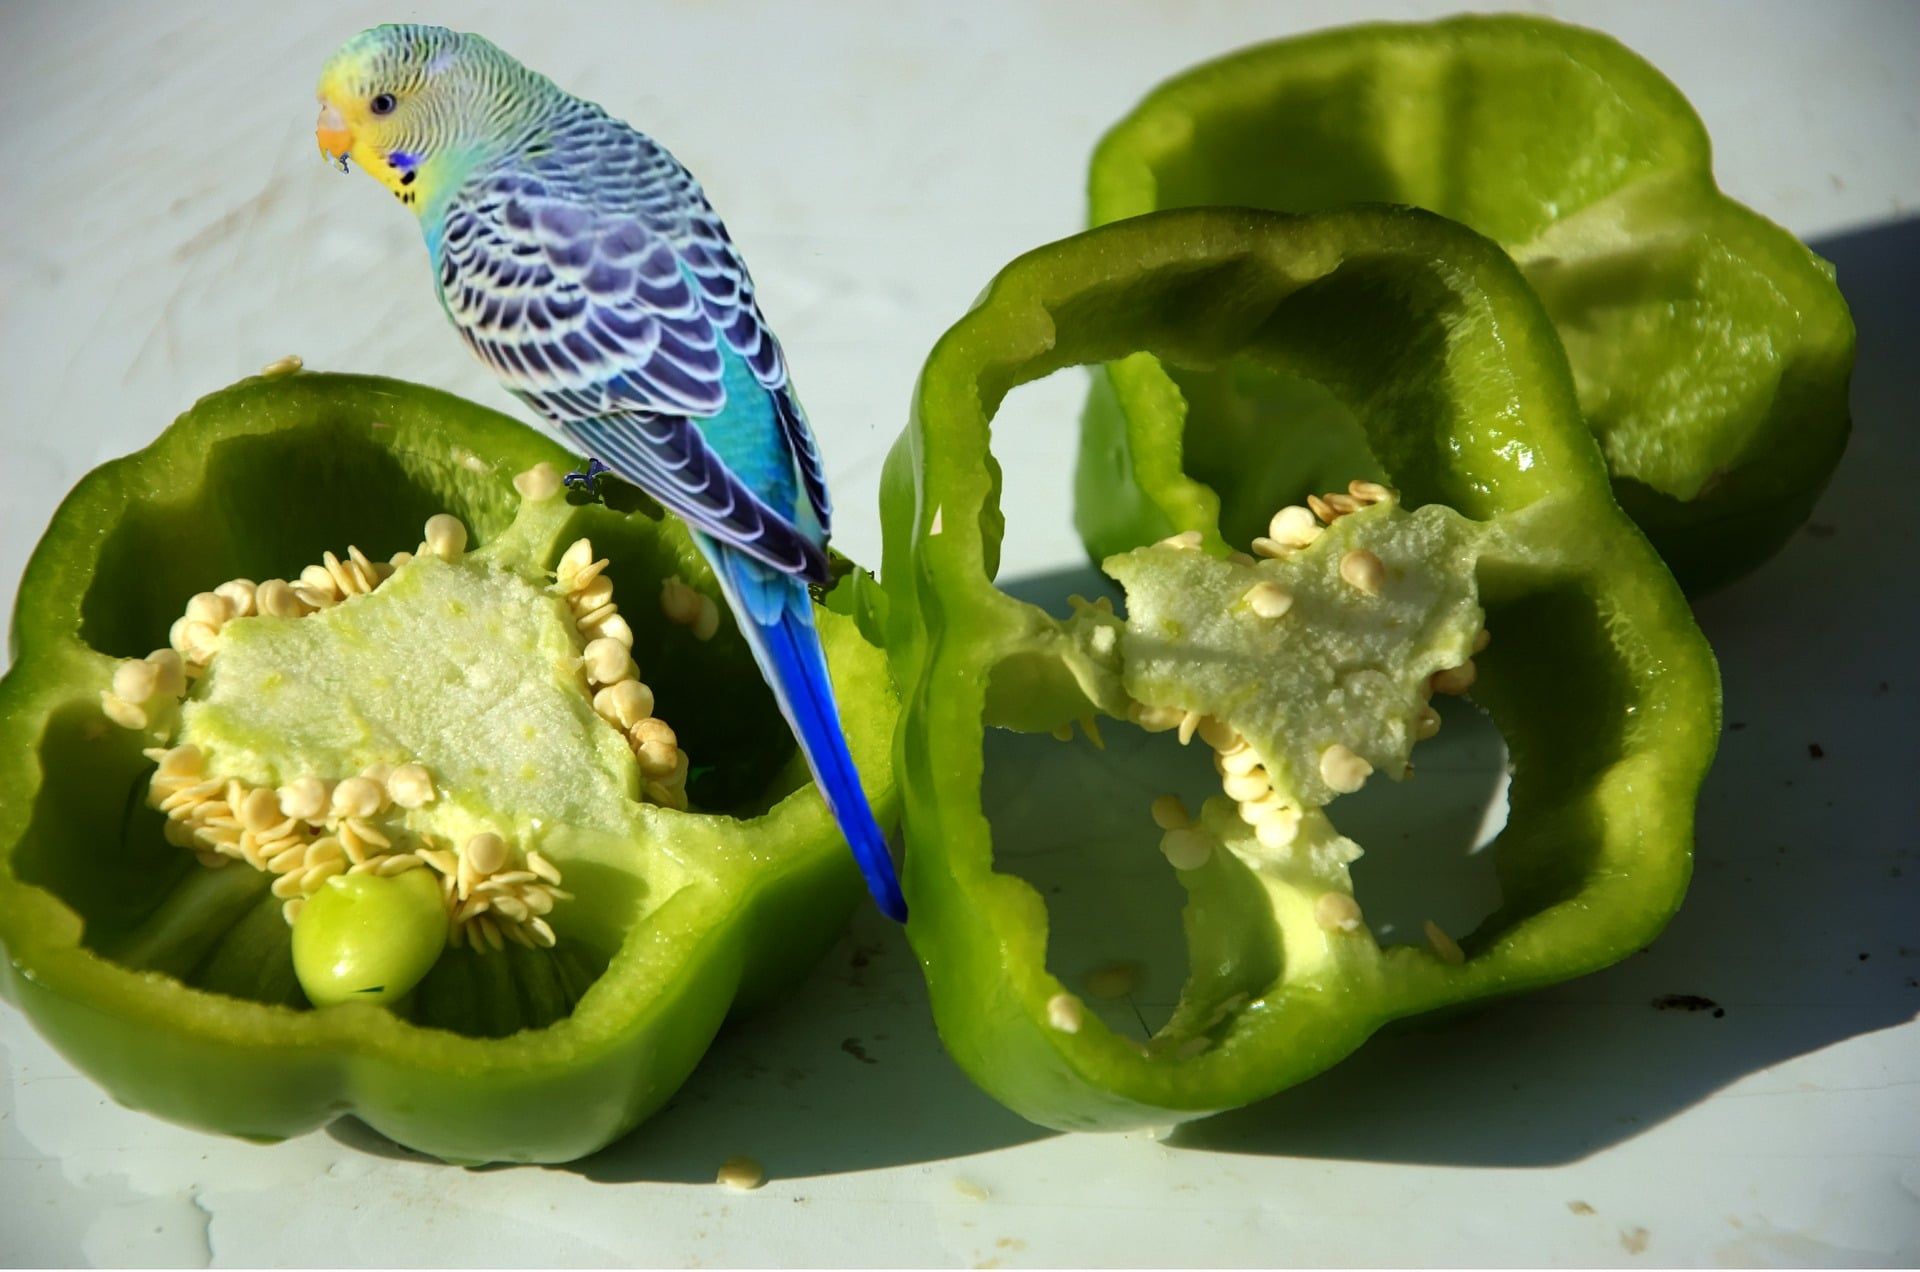 Blue budgerigar with yellow face sitting on slices of green bell pepper, pictured on white background.